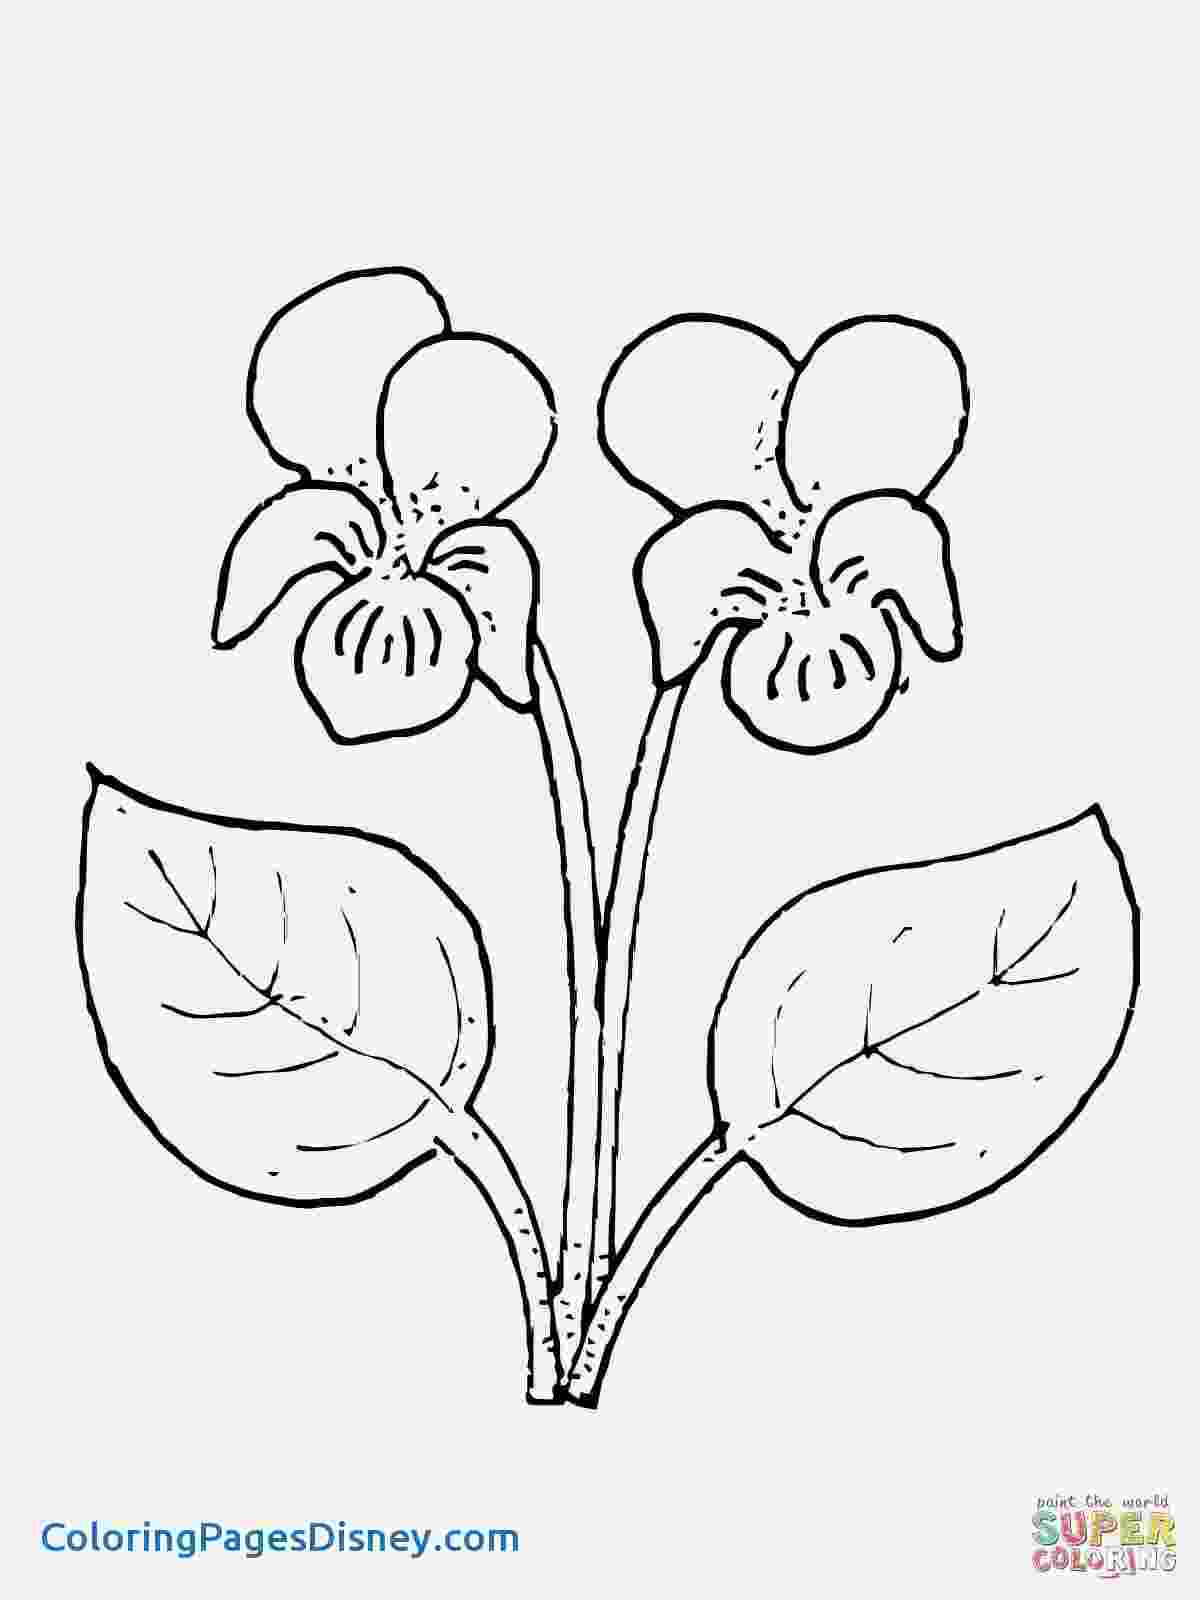 pansy coloring page new pansy rubber stamp designs for penny black ca page coloring pansy 